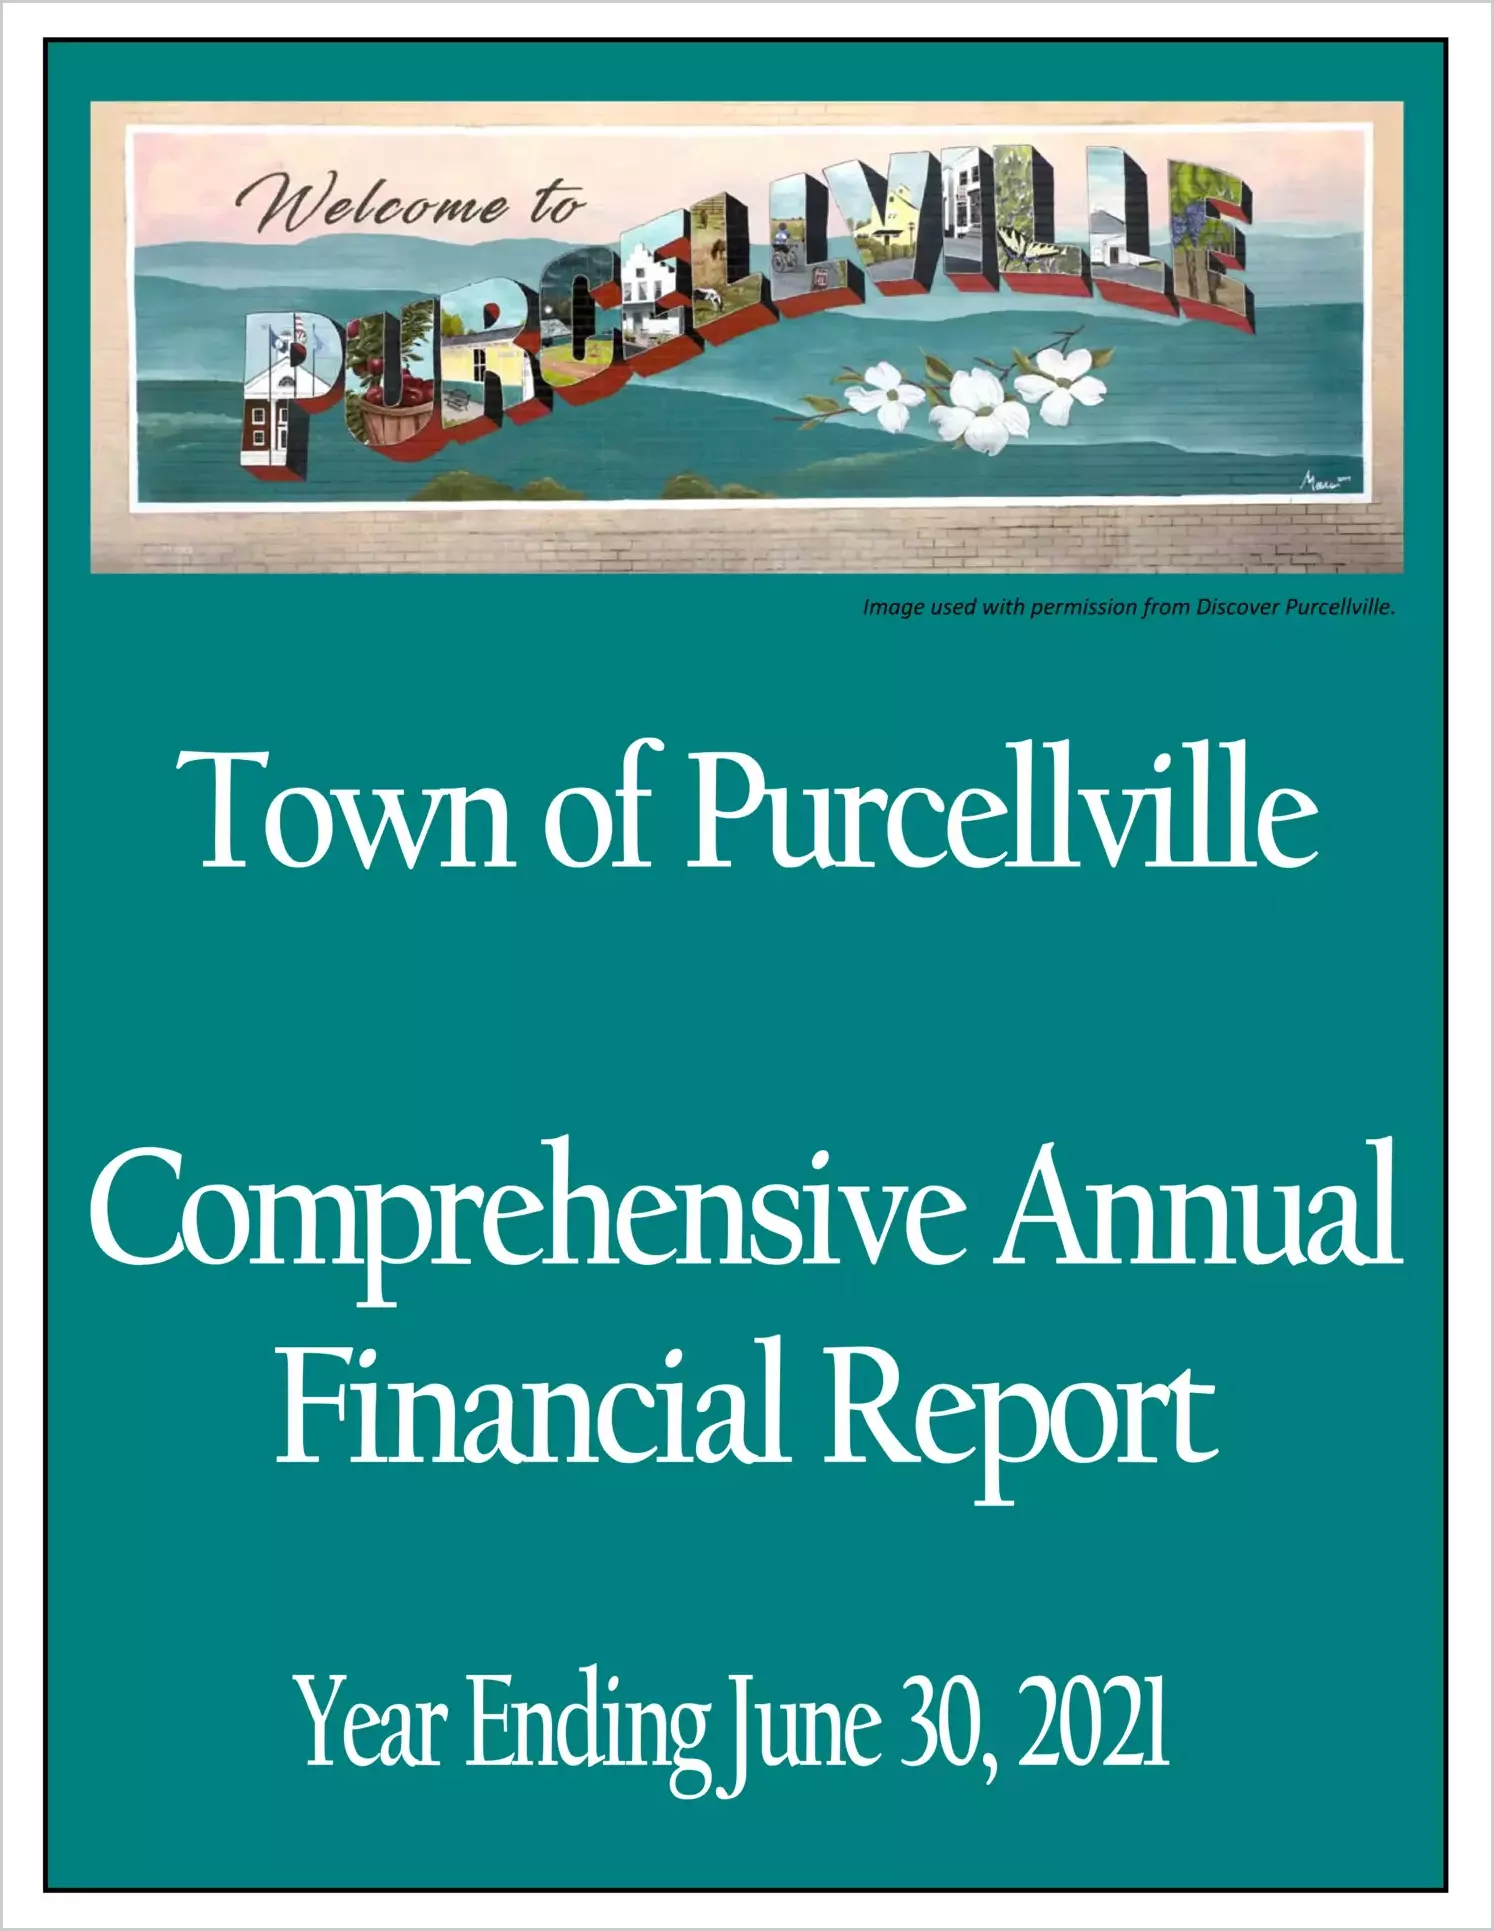 2021 Annual Financial Report for Town of Purcellville